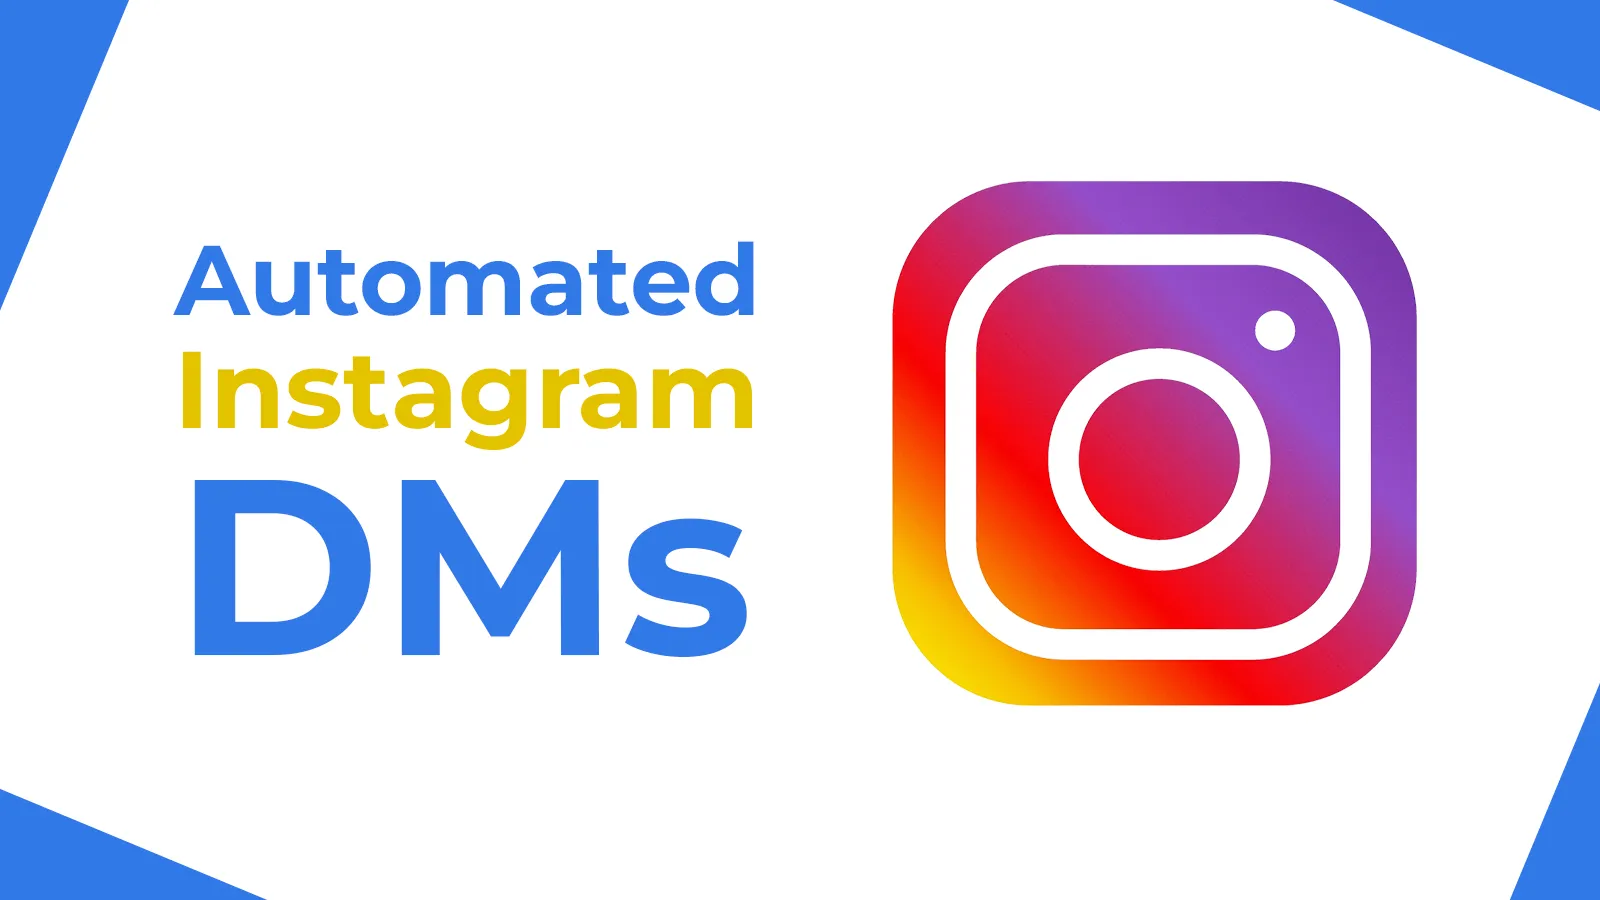 How to Automate Instagram DMs